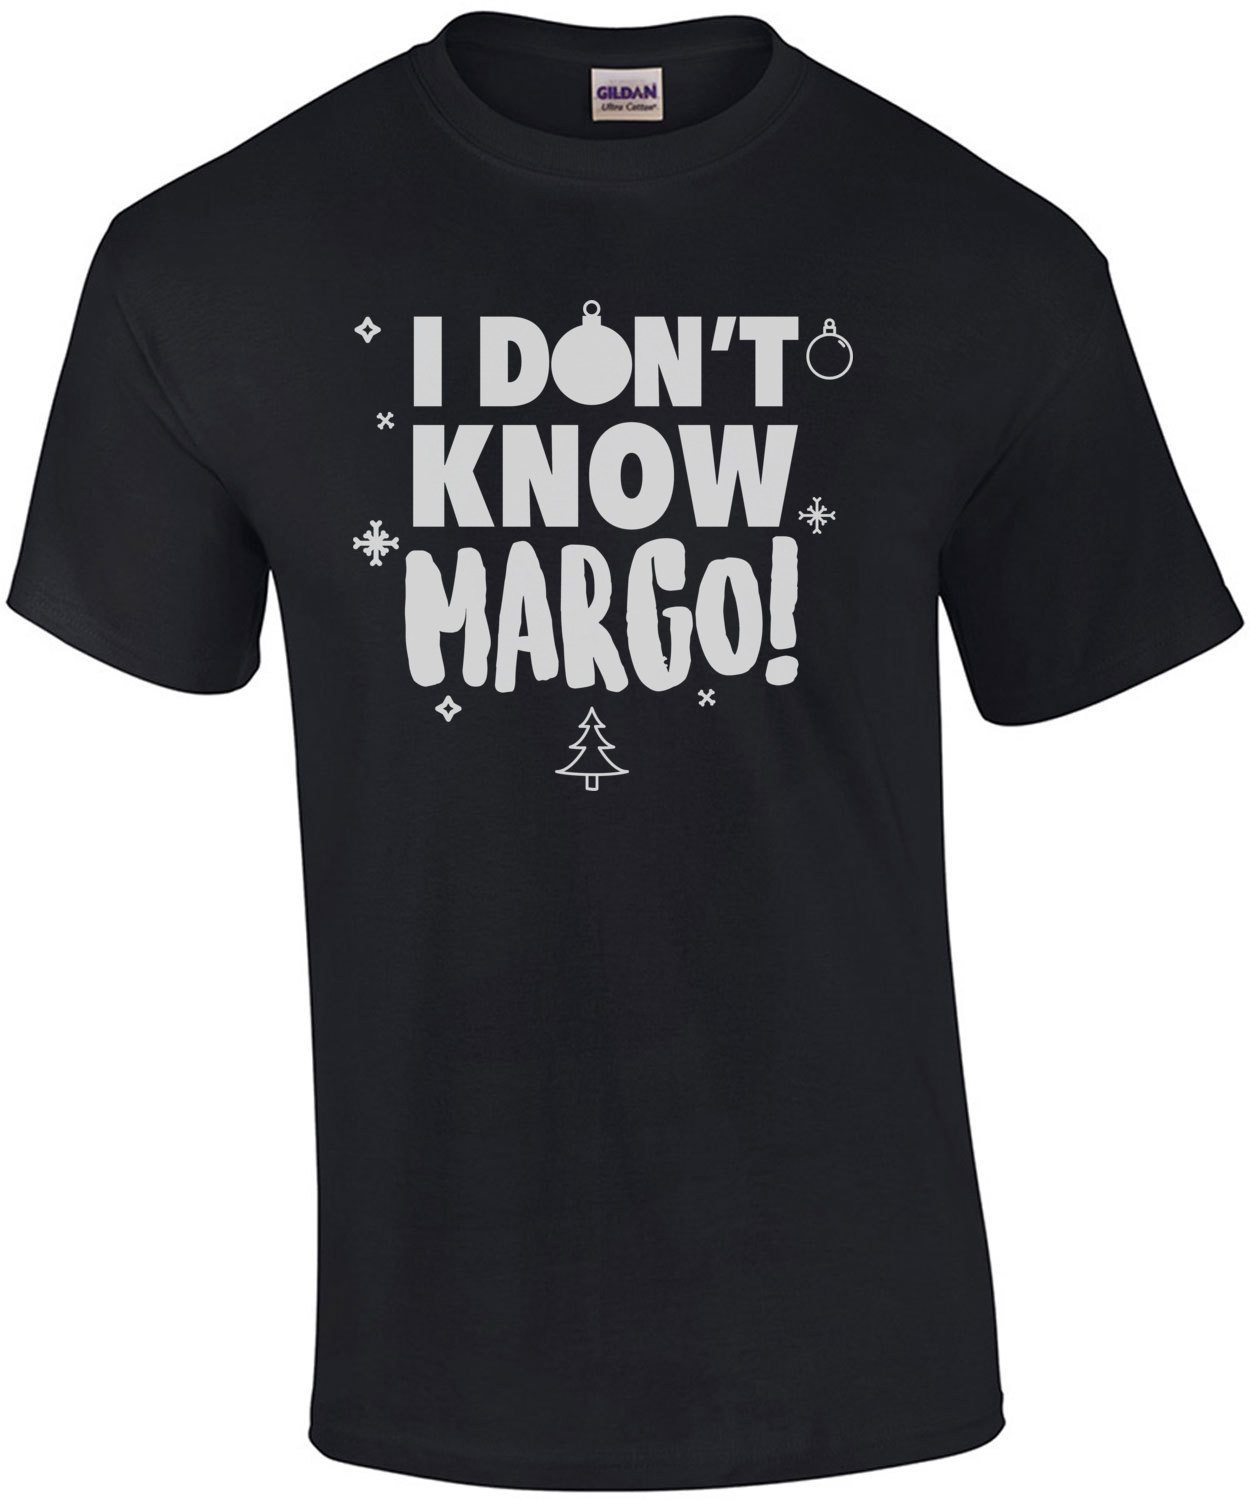 I don't know margo! Christmas Vacation T-Shirt. Couple's T-Shirt